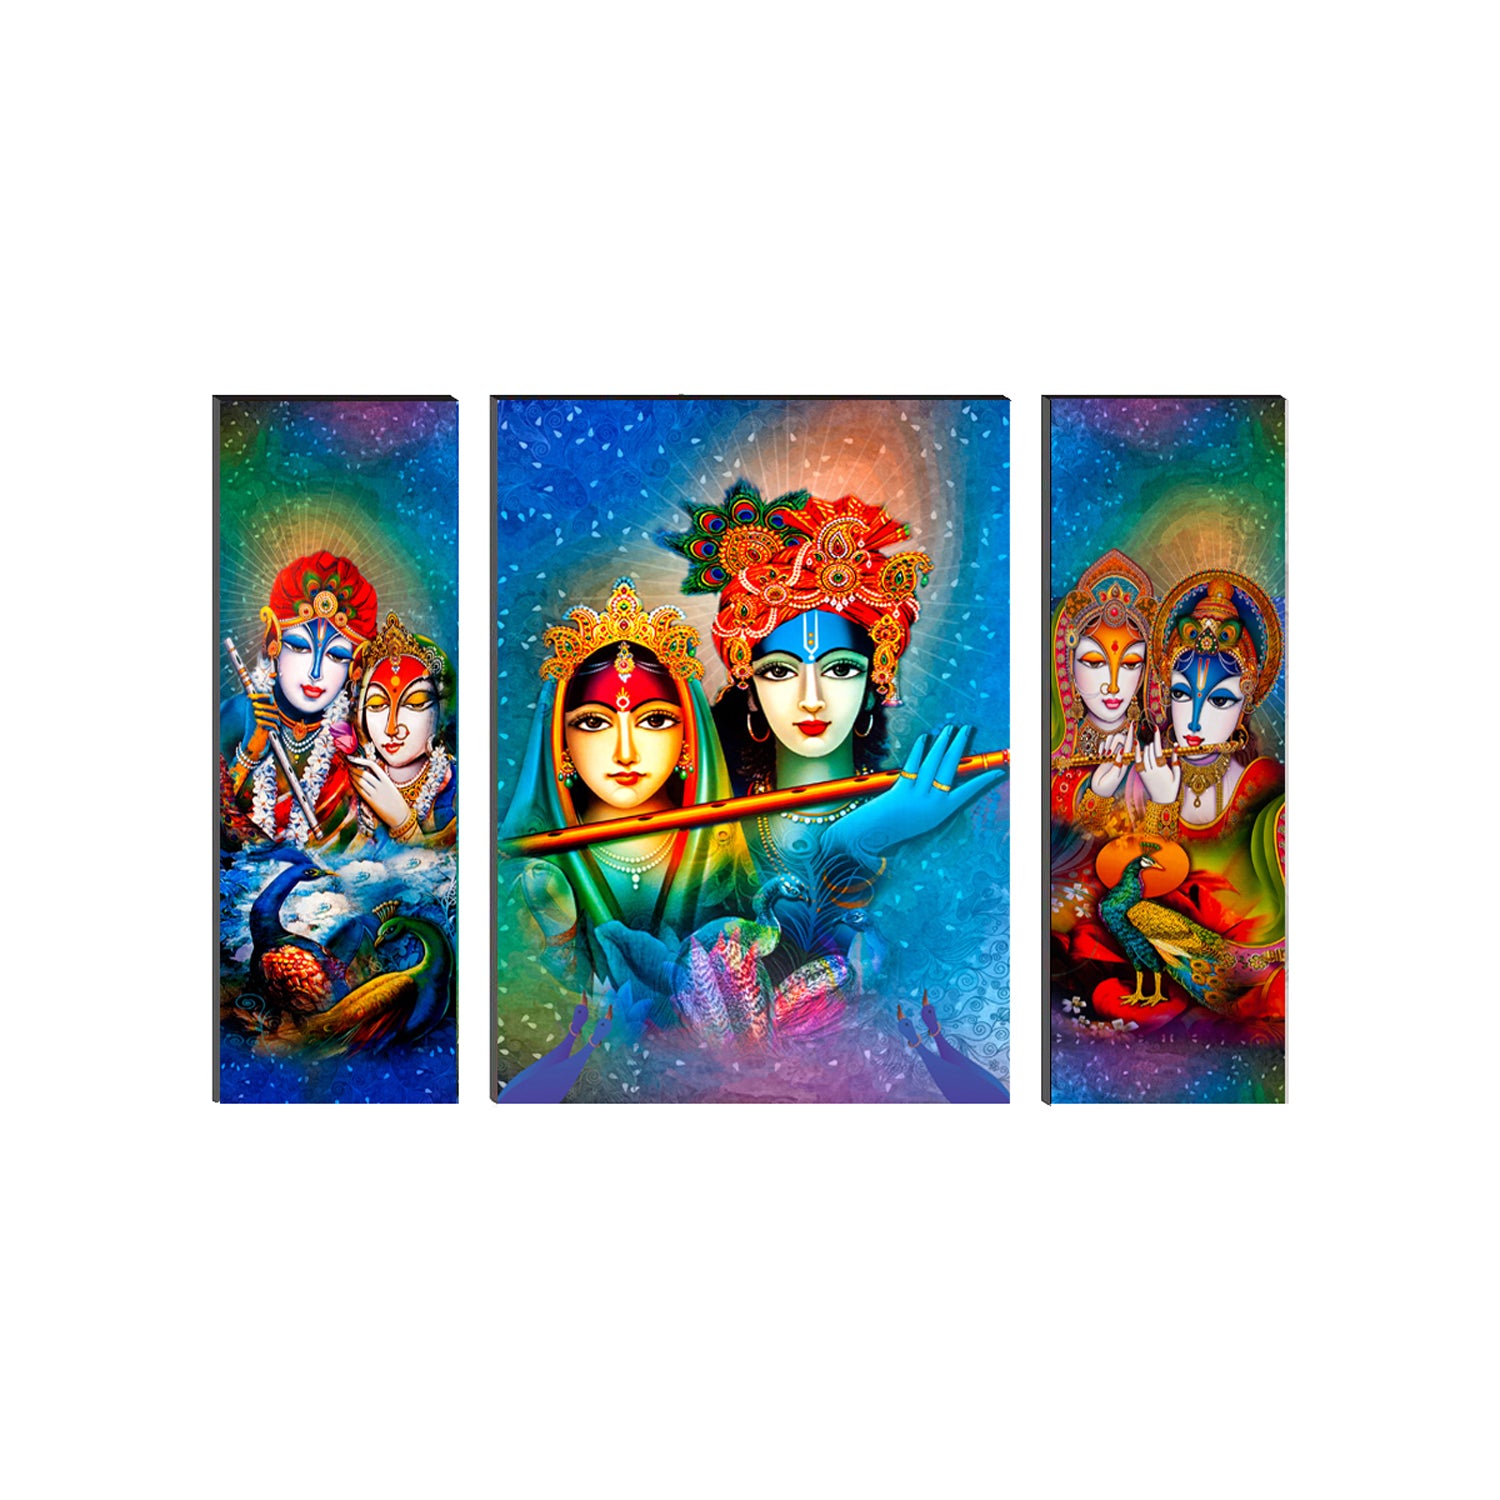 Beautiful Radha And Krishna With Flute Paintings Set Of 3 Digital Printed Religious Wall Art